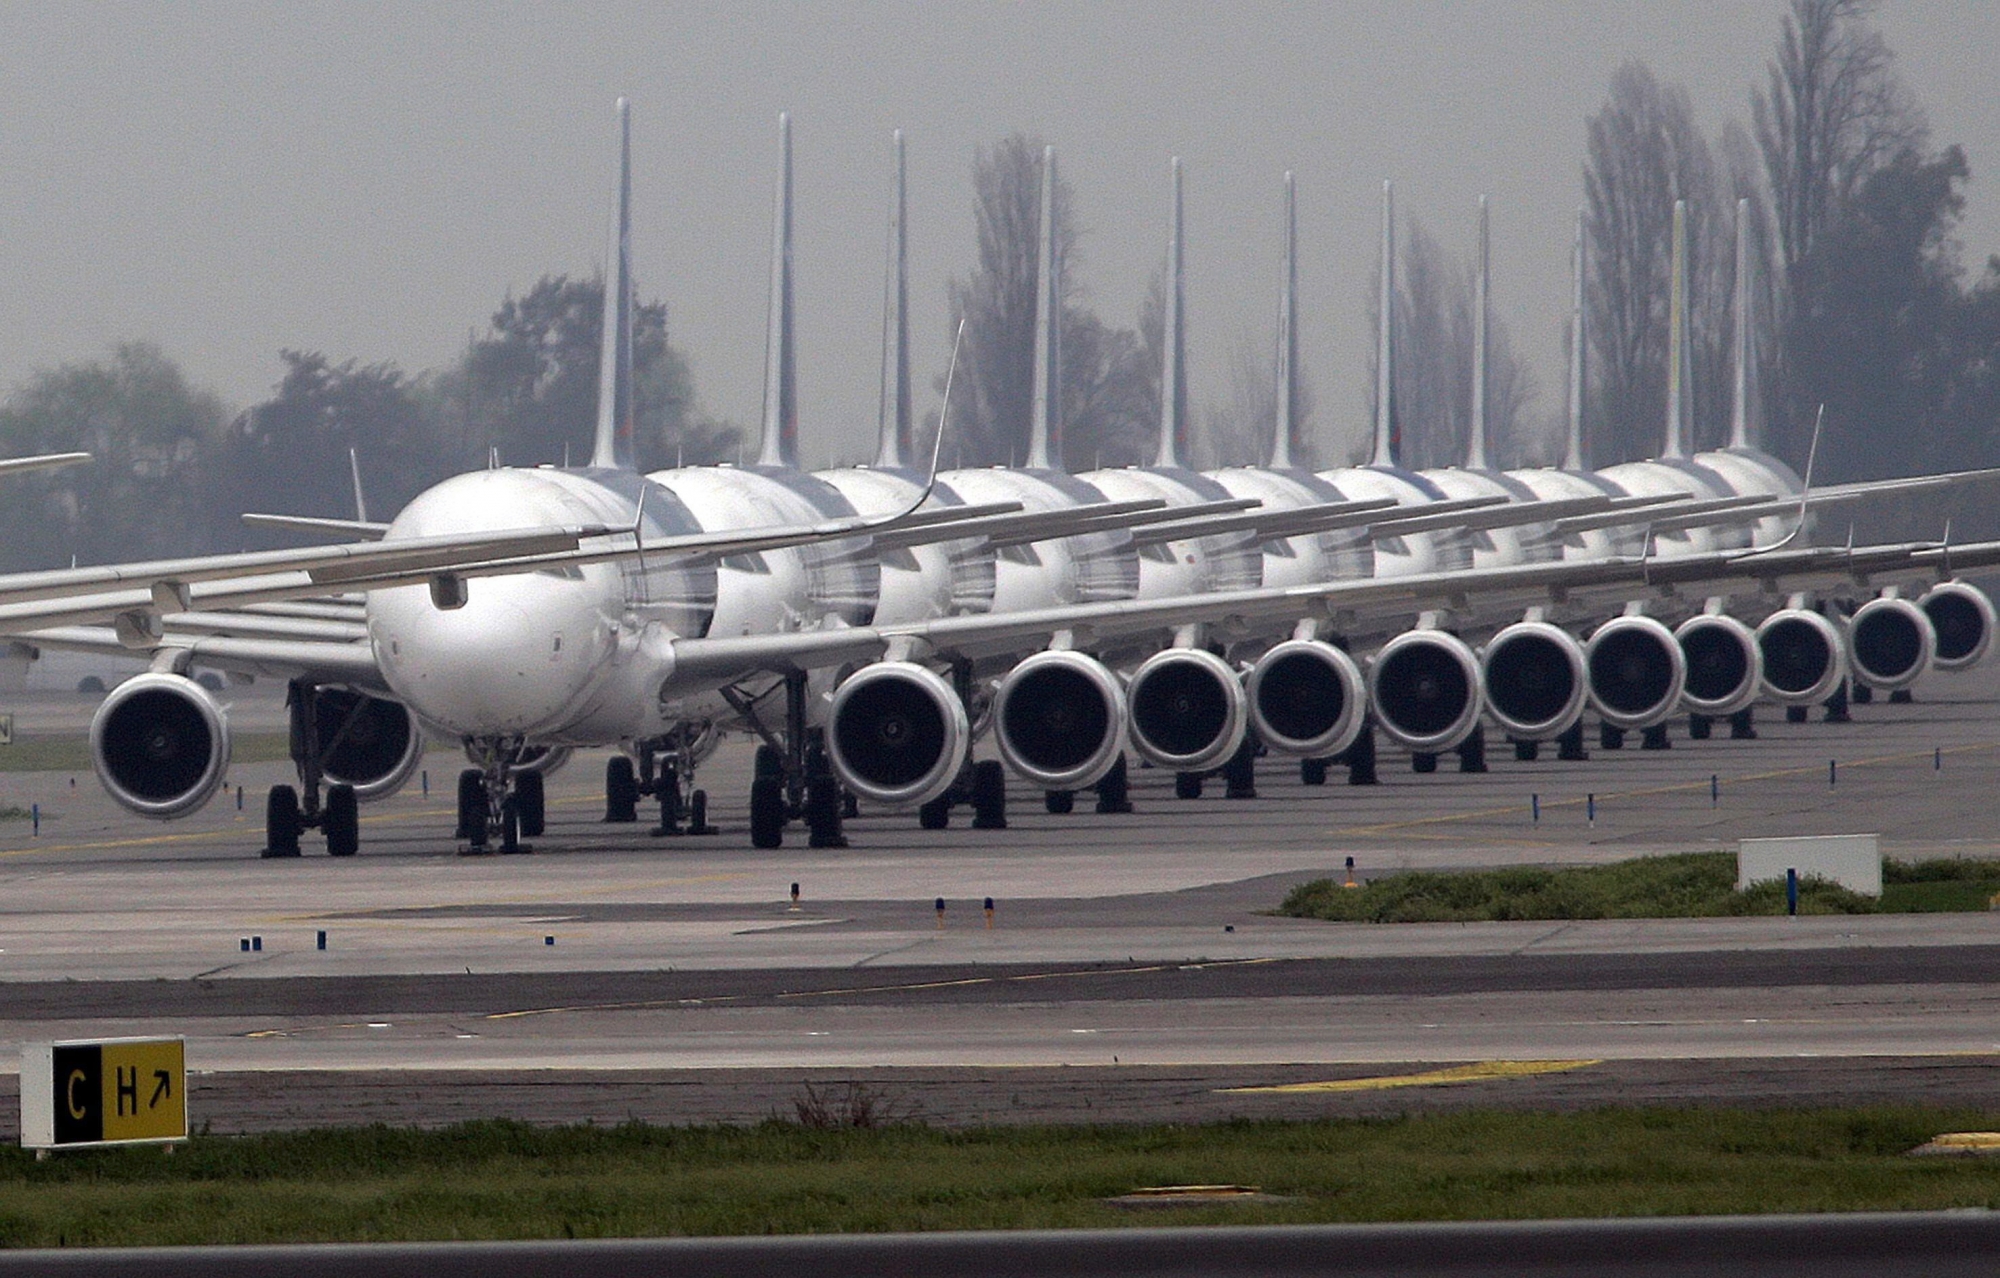 epa04931945 A line of planes is parked on the tarmac during a strike day at the International Airport of Santiago de Chile, Chile, 15 September 2015. Some 3,880 employees of the Chilean General Direction of Civil Aeronautics (DGAC) started a 24-hour strike. According to the DGAC a total of 48 public and private airports in Chile have been affected by the strike.  EPA/MARIO RUIZ CHILE TRANSPORT STRIKE